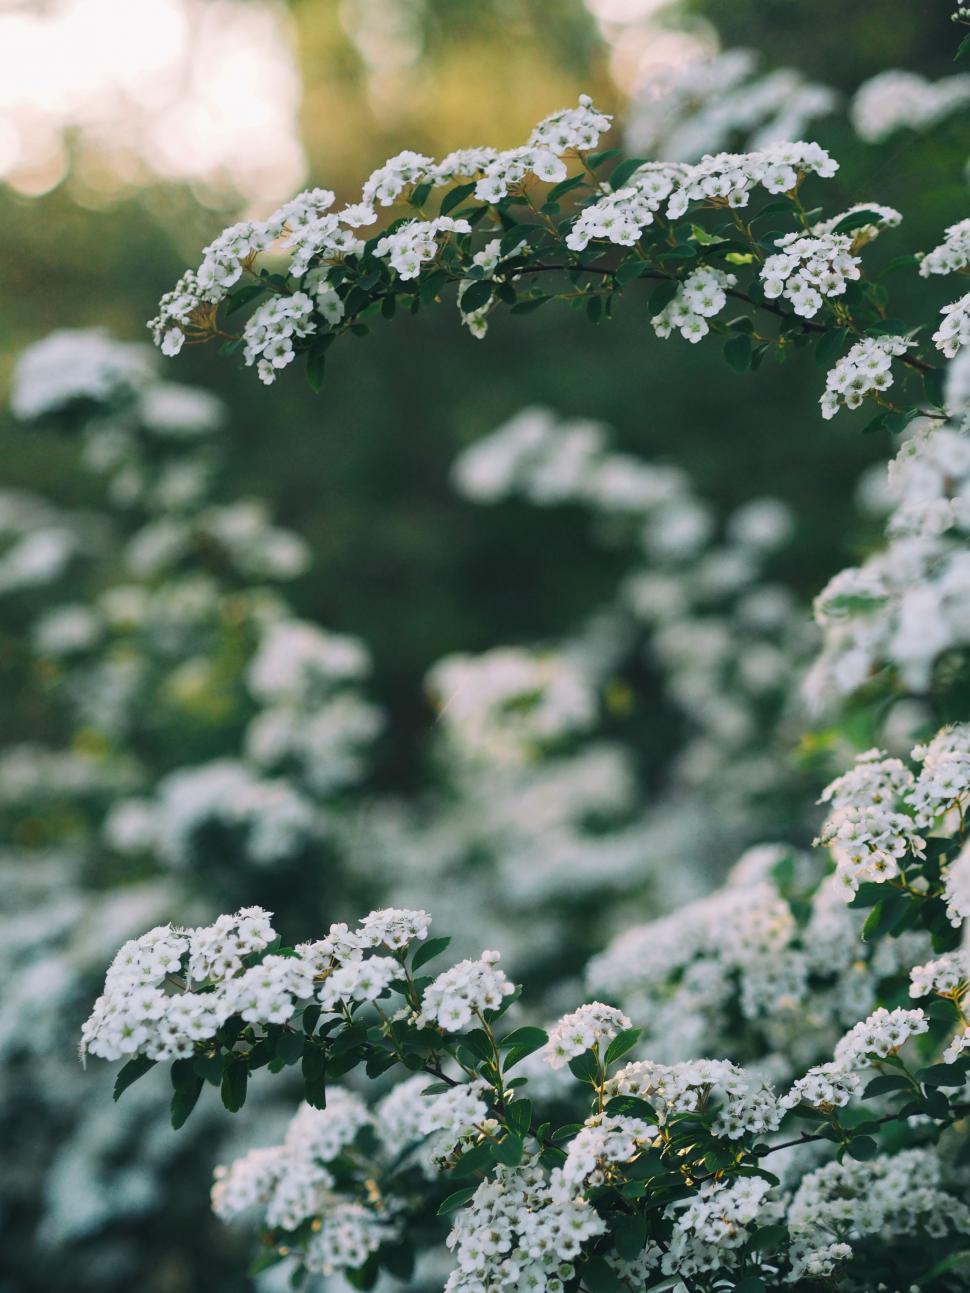 Free Image of Cluster of White Flowers in a Meadow 